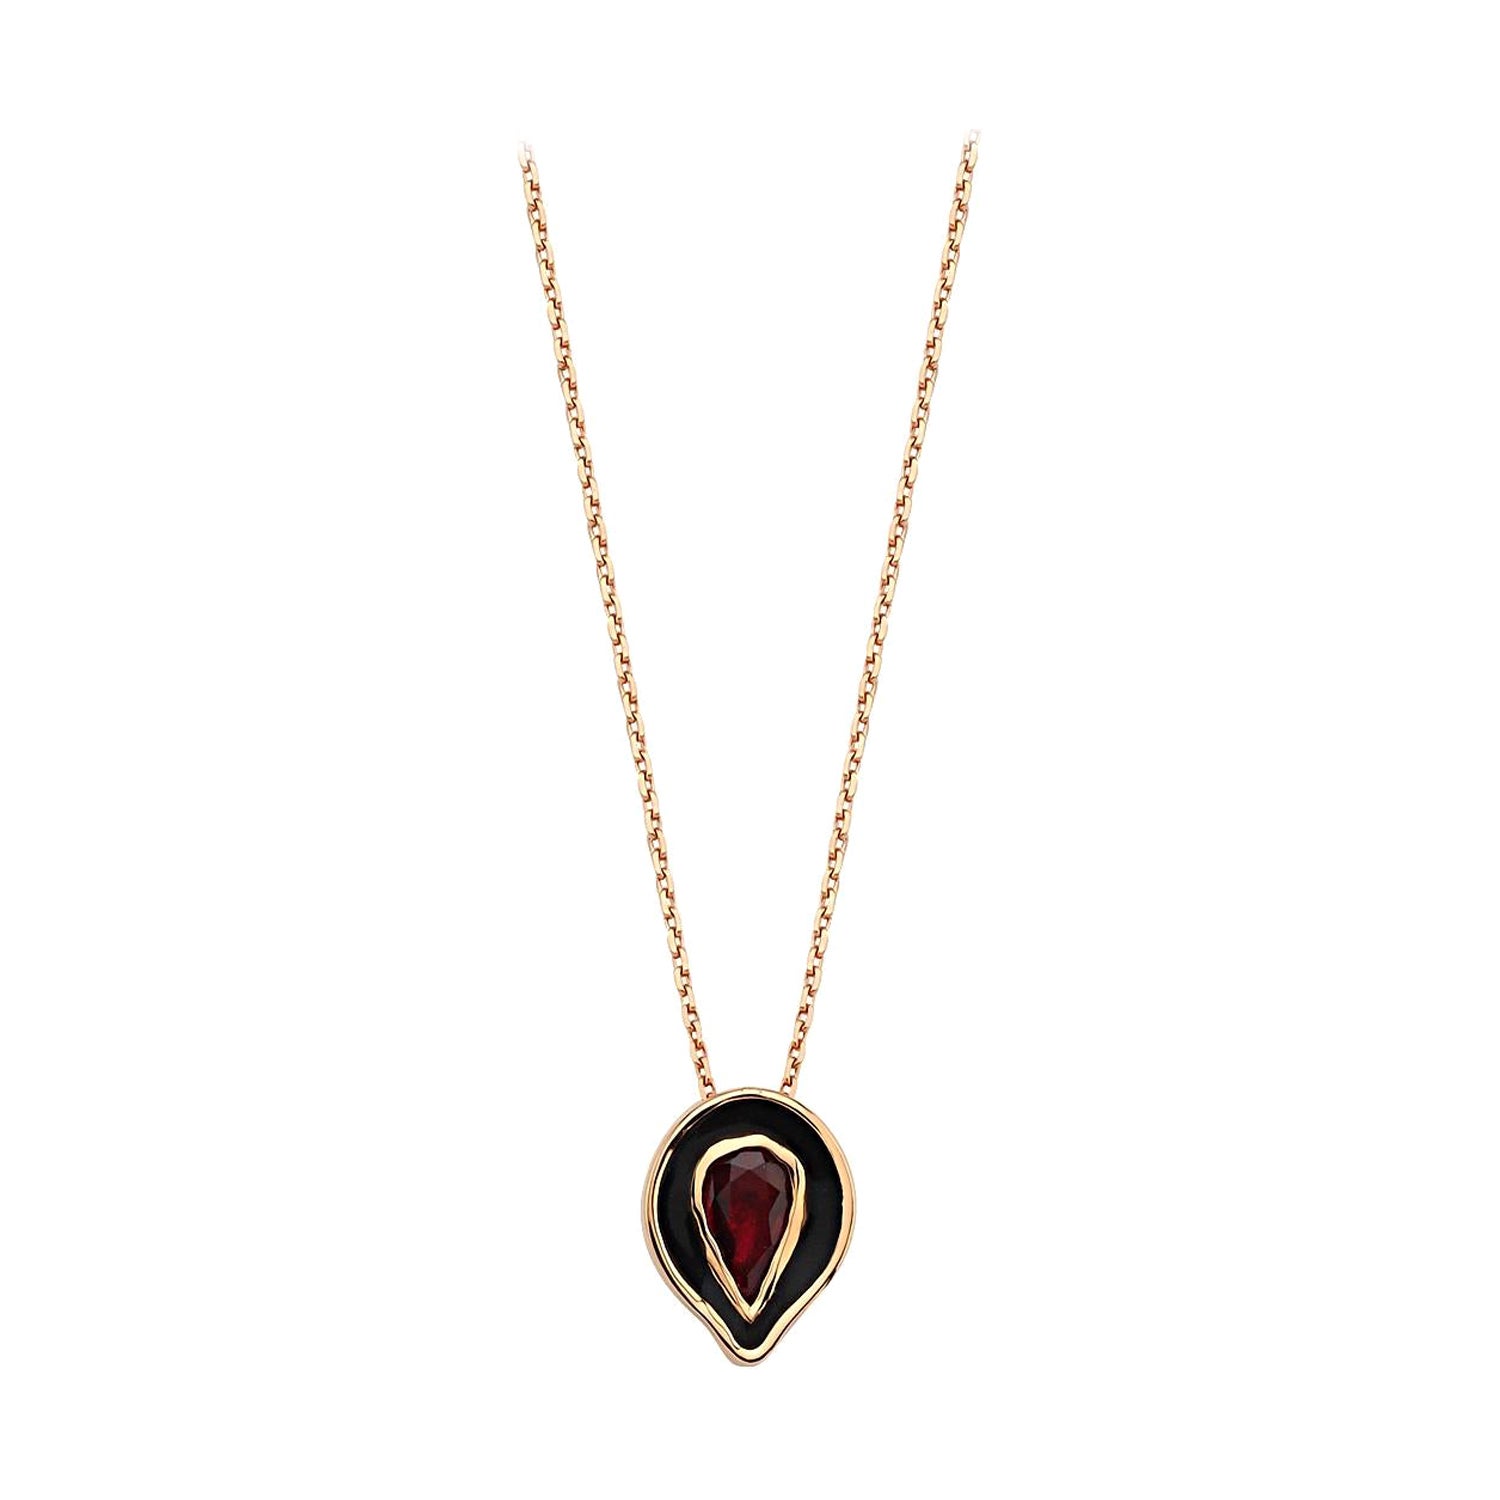 Baby Dragon Necklace in 14K Rose Gold with 0.16 Ct Ruby by Selda Jewellery